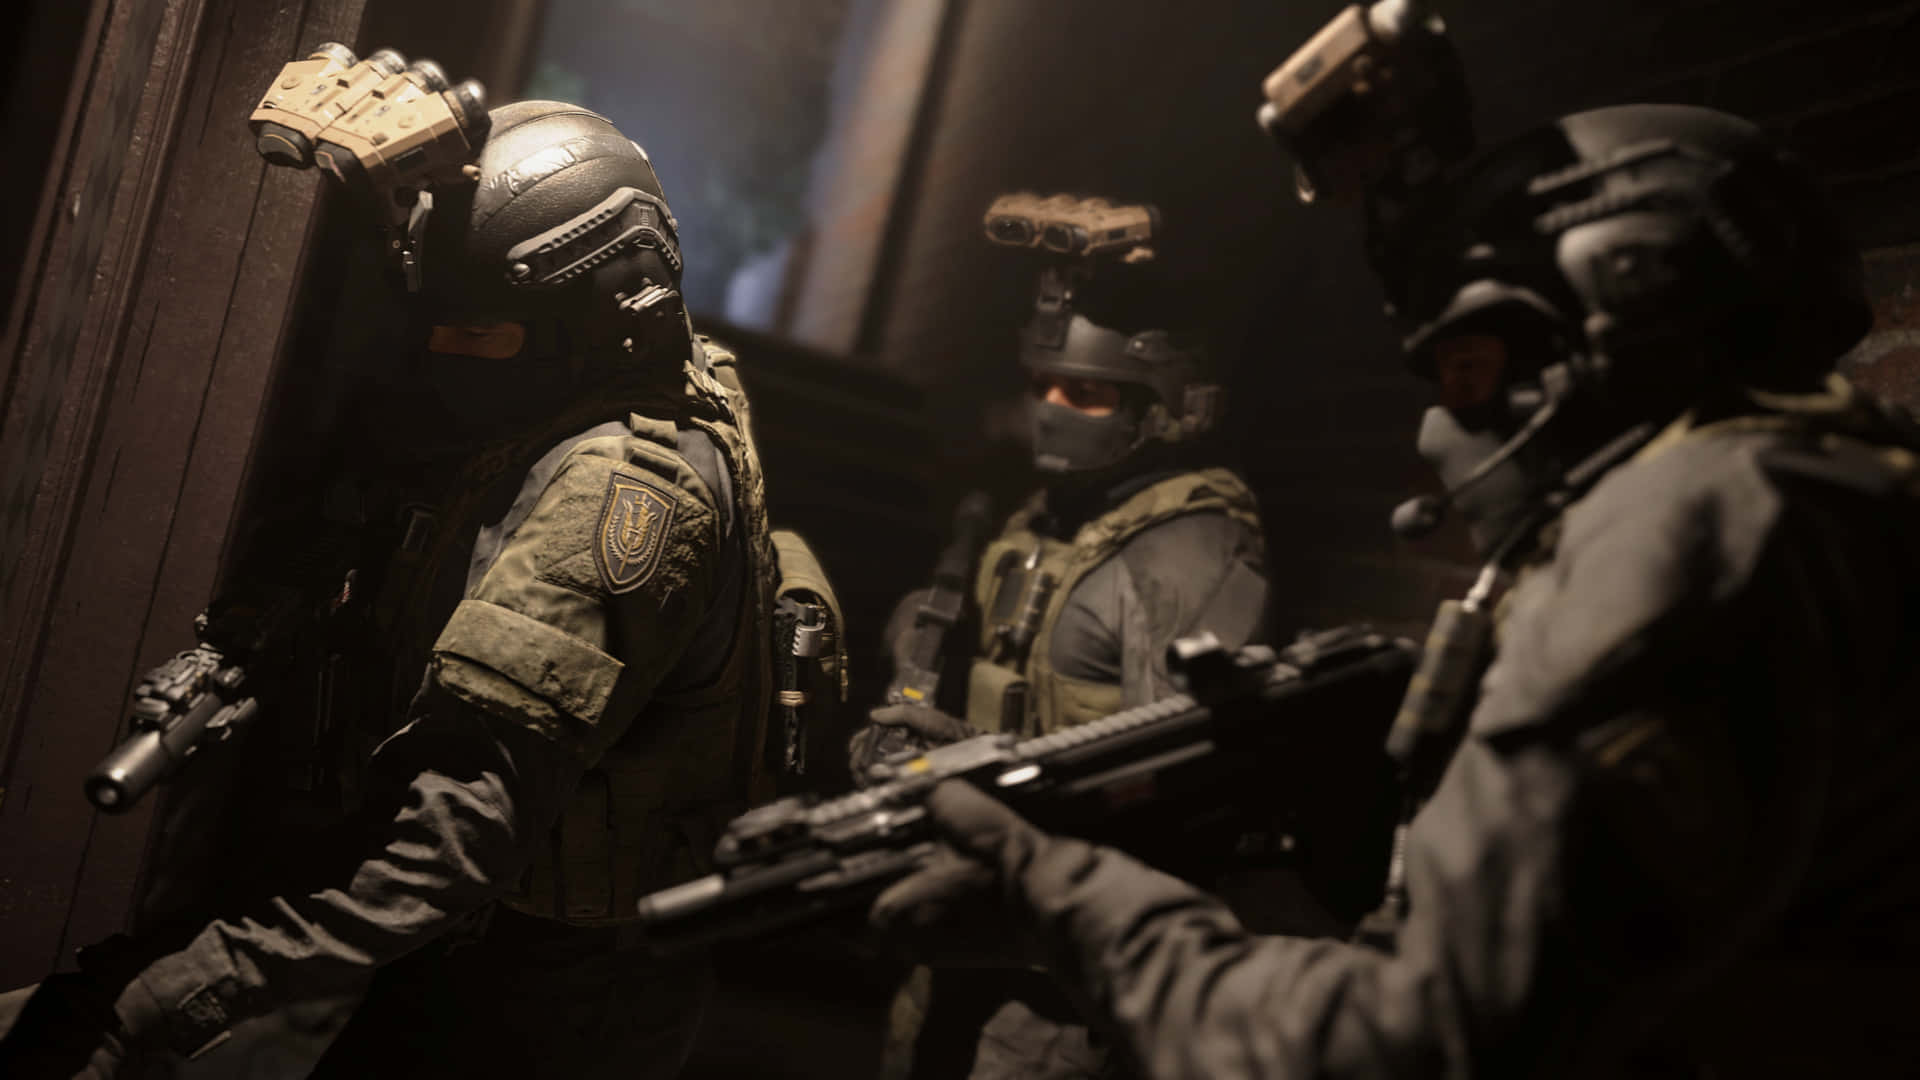 Prepare to join the fight with Call of Duty Modern Warfare.